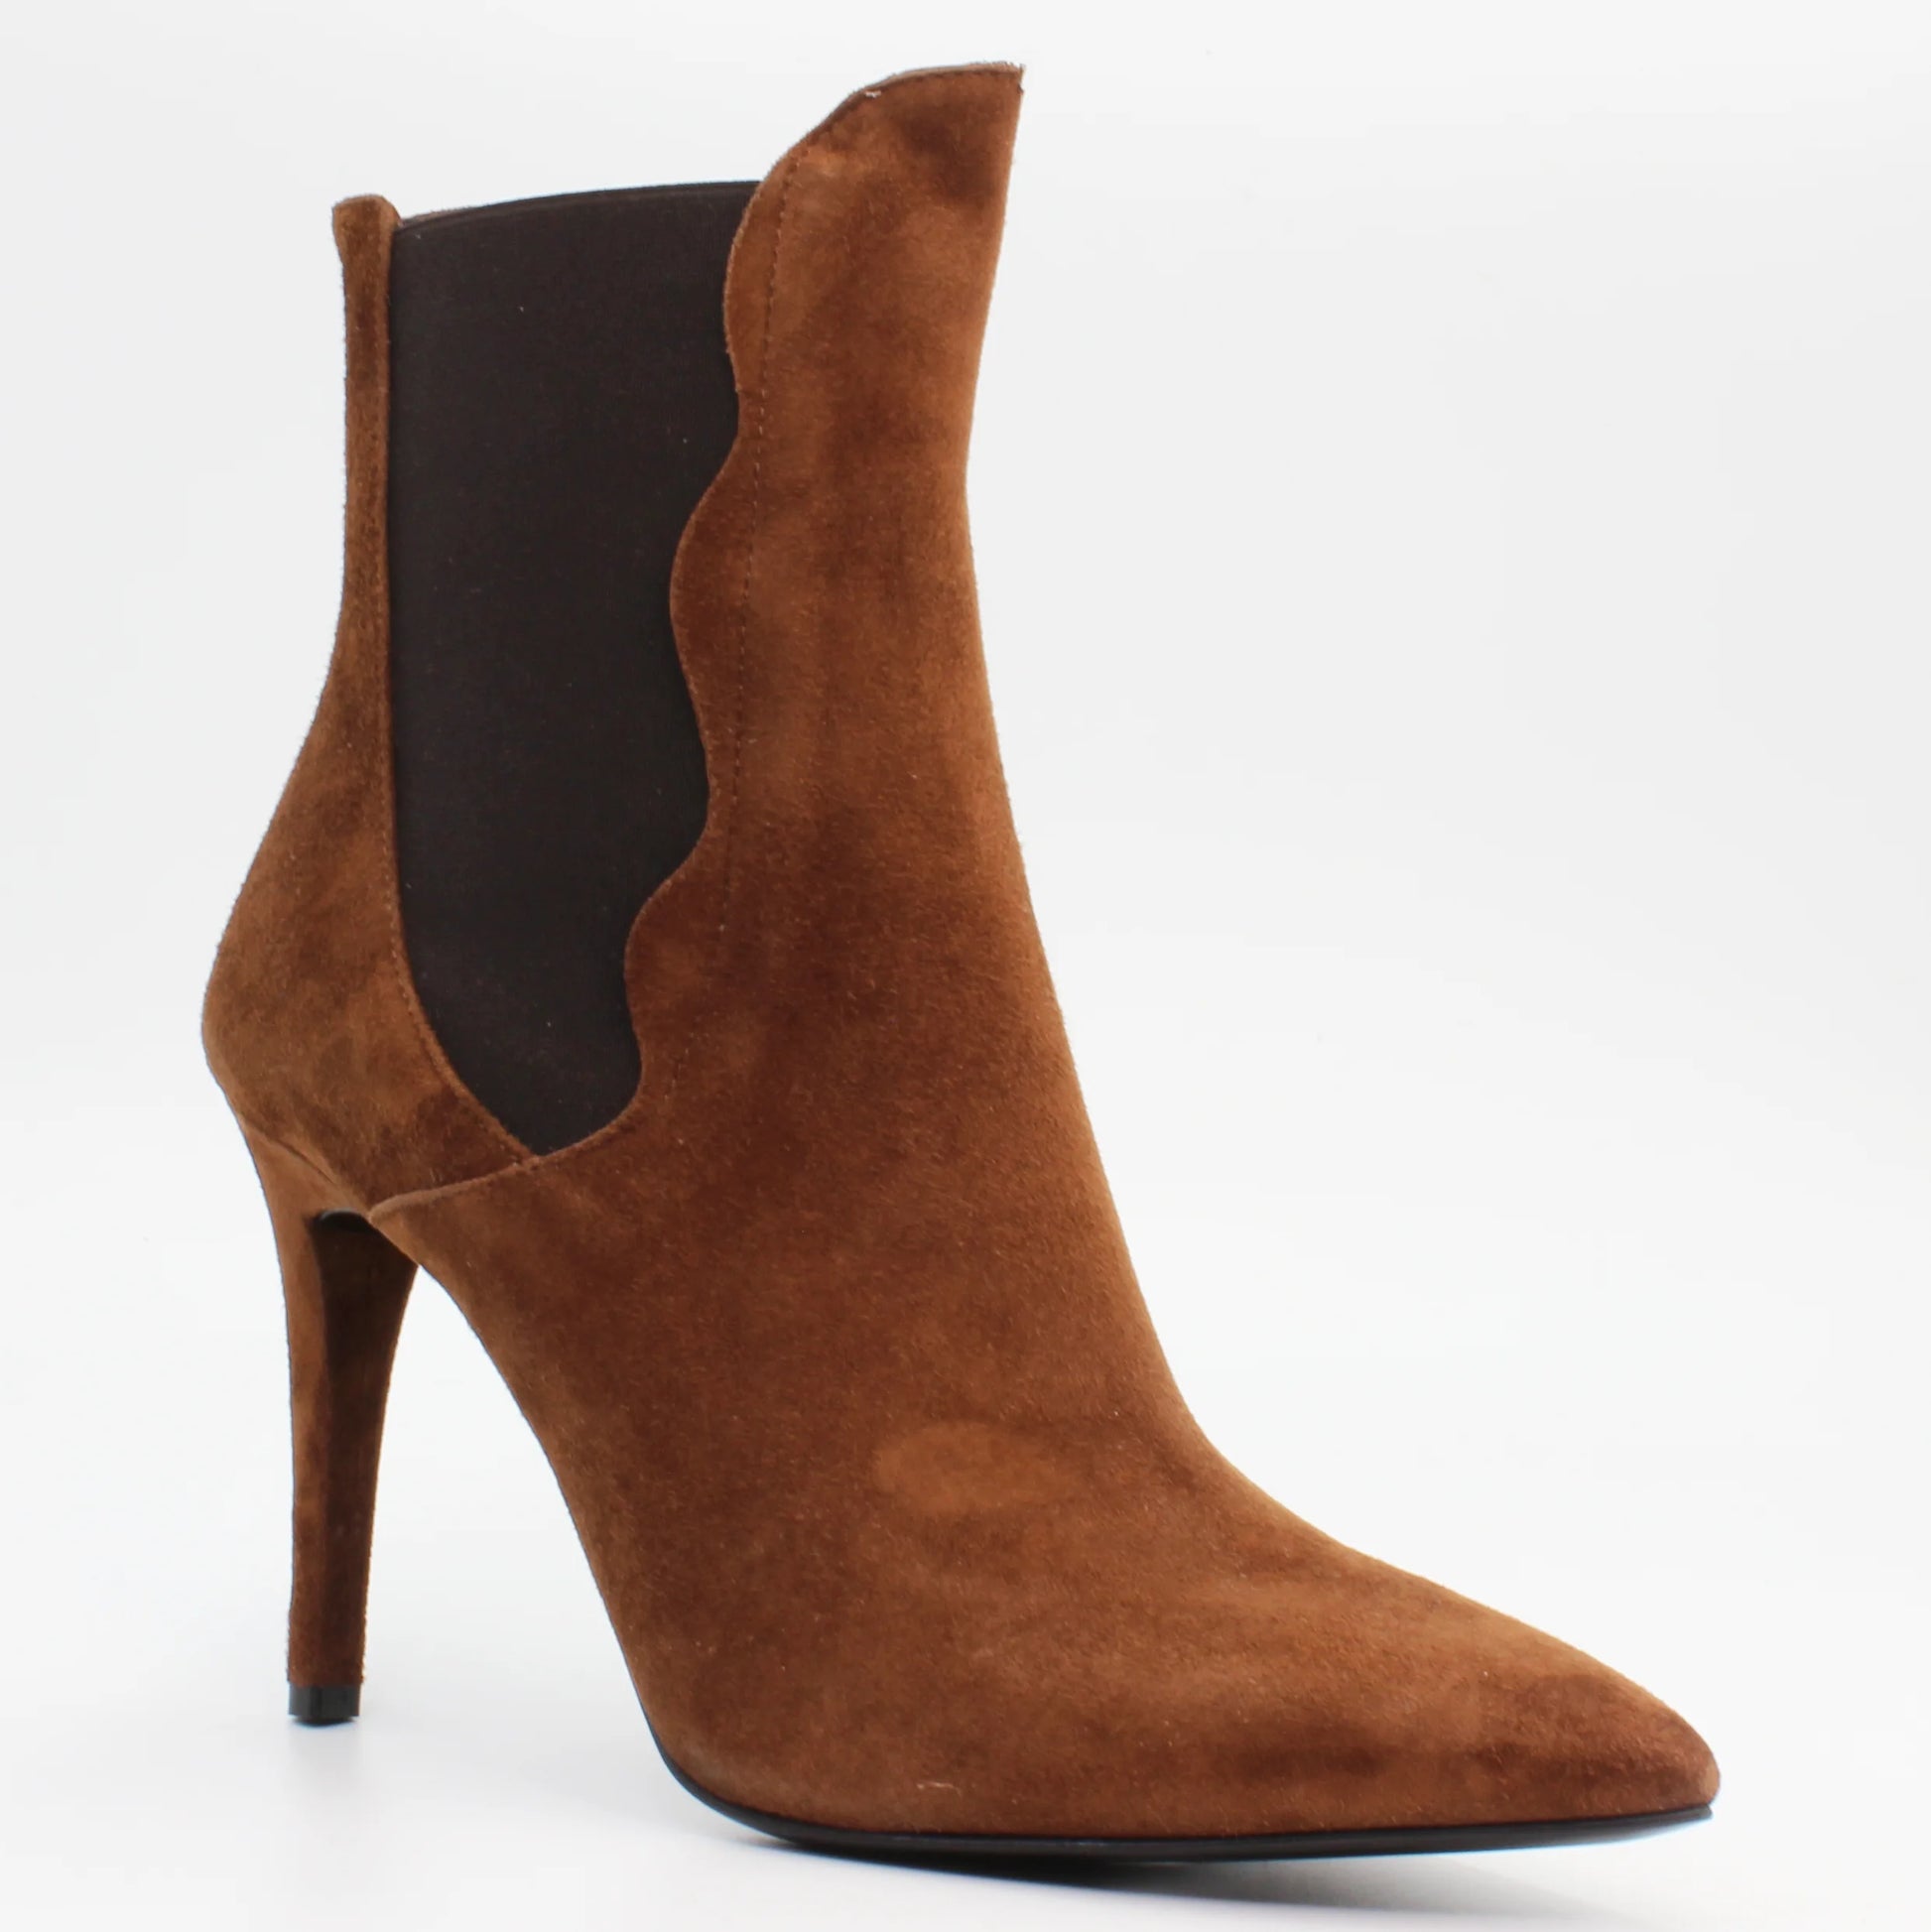 Shop Ladies Italian Suede Stiletto Ankle Boot in Brown (AL57525) or browse our range of hand-made Italian ankle boots in leather or suede in-store at Aliverti Durban or Cape Town, or shop online. We deliver in South Africa & offer multiple payment plans as well as accept multiple safe & secure payment methods.